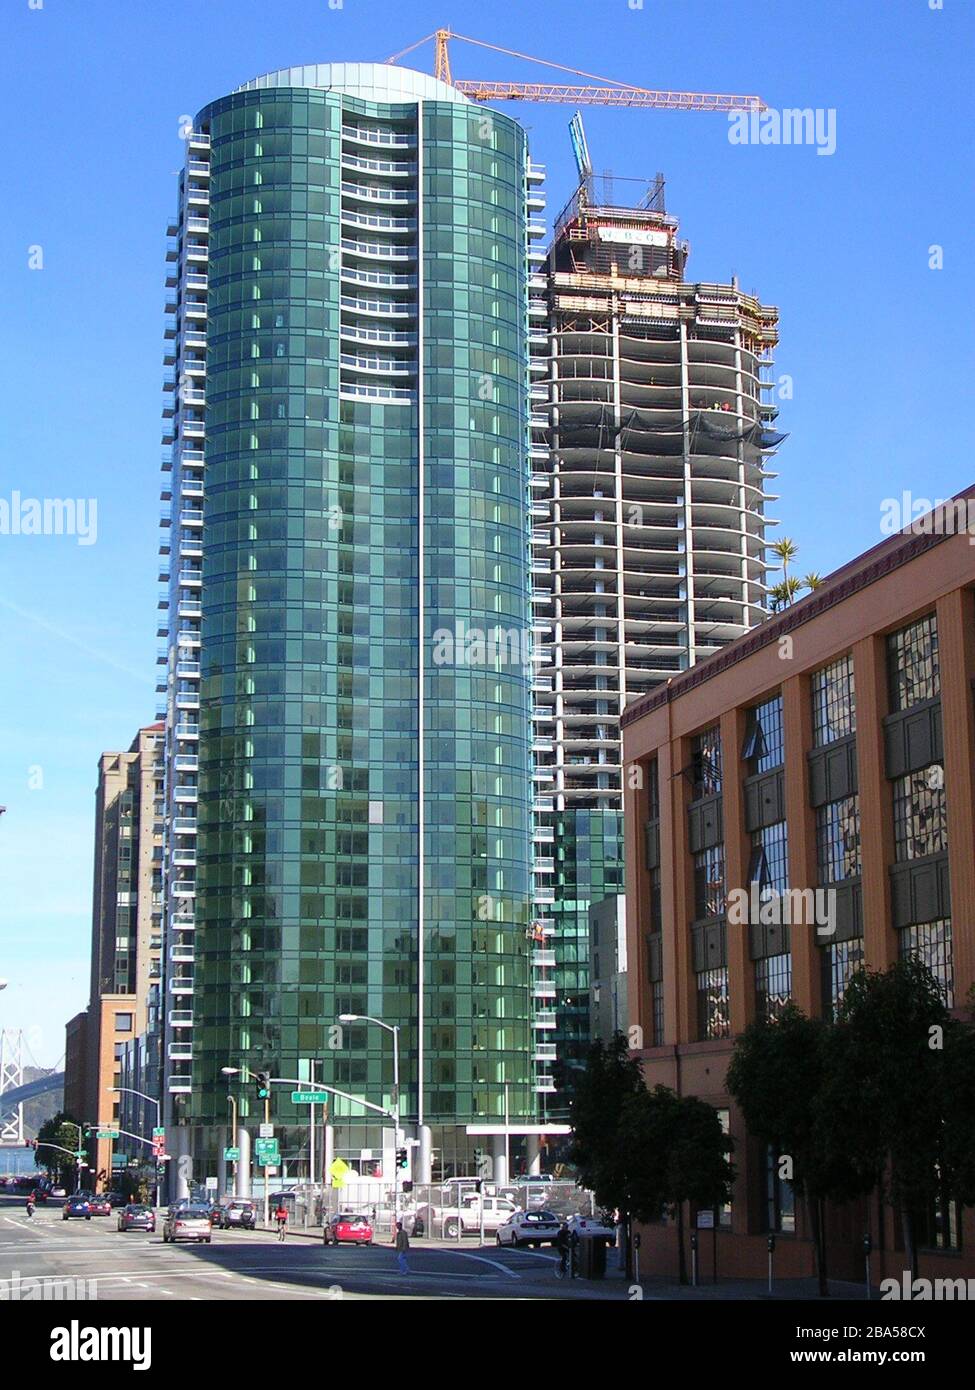 'English: The Infinity (300 Spear Street) complex, the completed tower II is on the left, while the under construction tower I is on the right.; 9 February 2008; Own work (Original text:  I created this work entirely by myself.); Cheers. Trance addict - Armin van Buuren - Oceanlab; ' Stock Photo